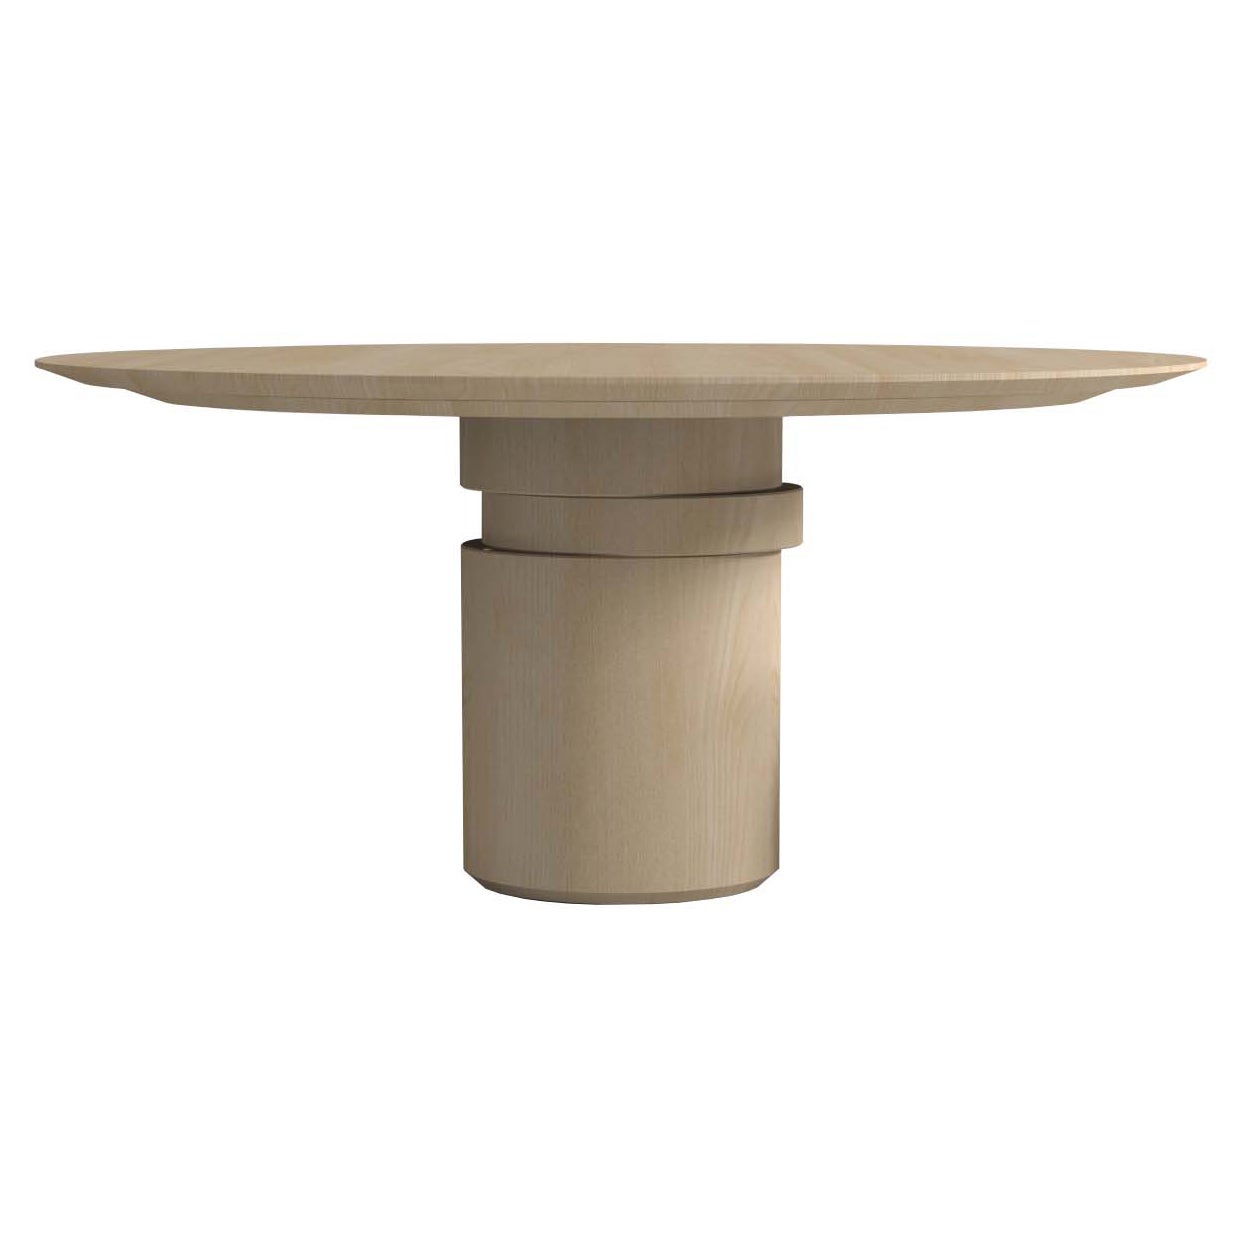 A refined and eye-pleasing design. The disc table is a seemingly round table of which the tabletop is supported by a central column, surprisingly interrupted by a decentralised disc. Our tables are manufactured by our craftsmen and are available in